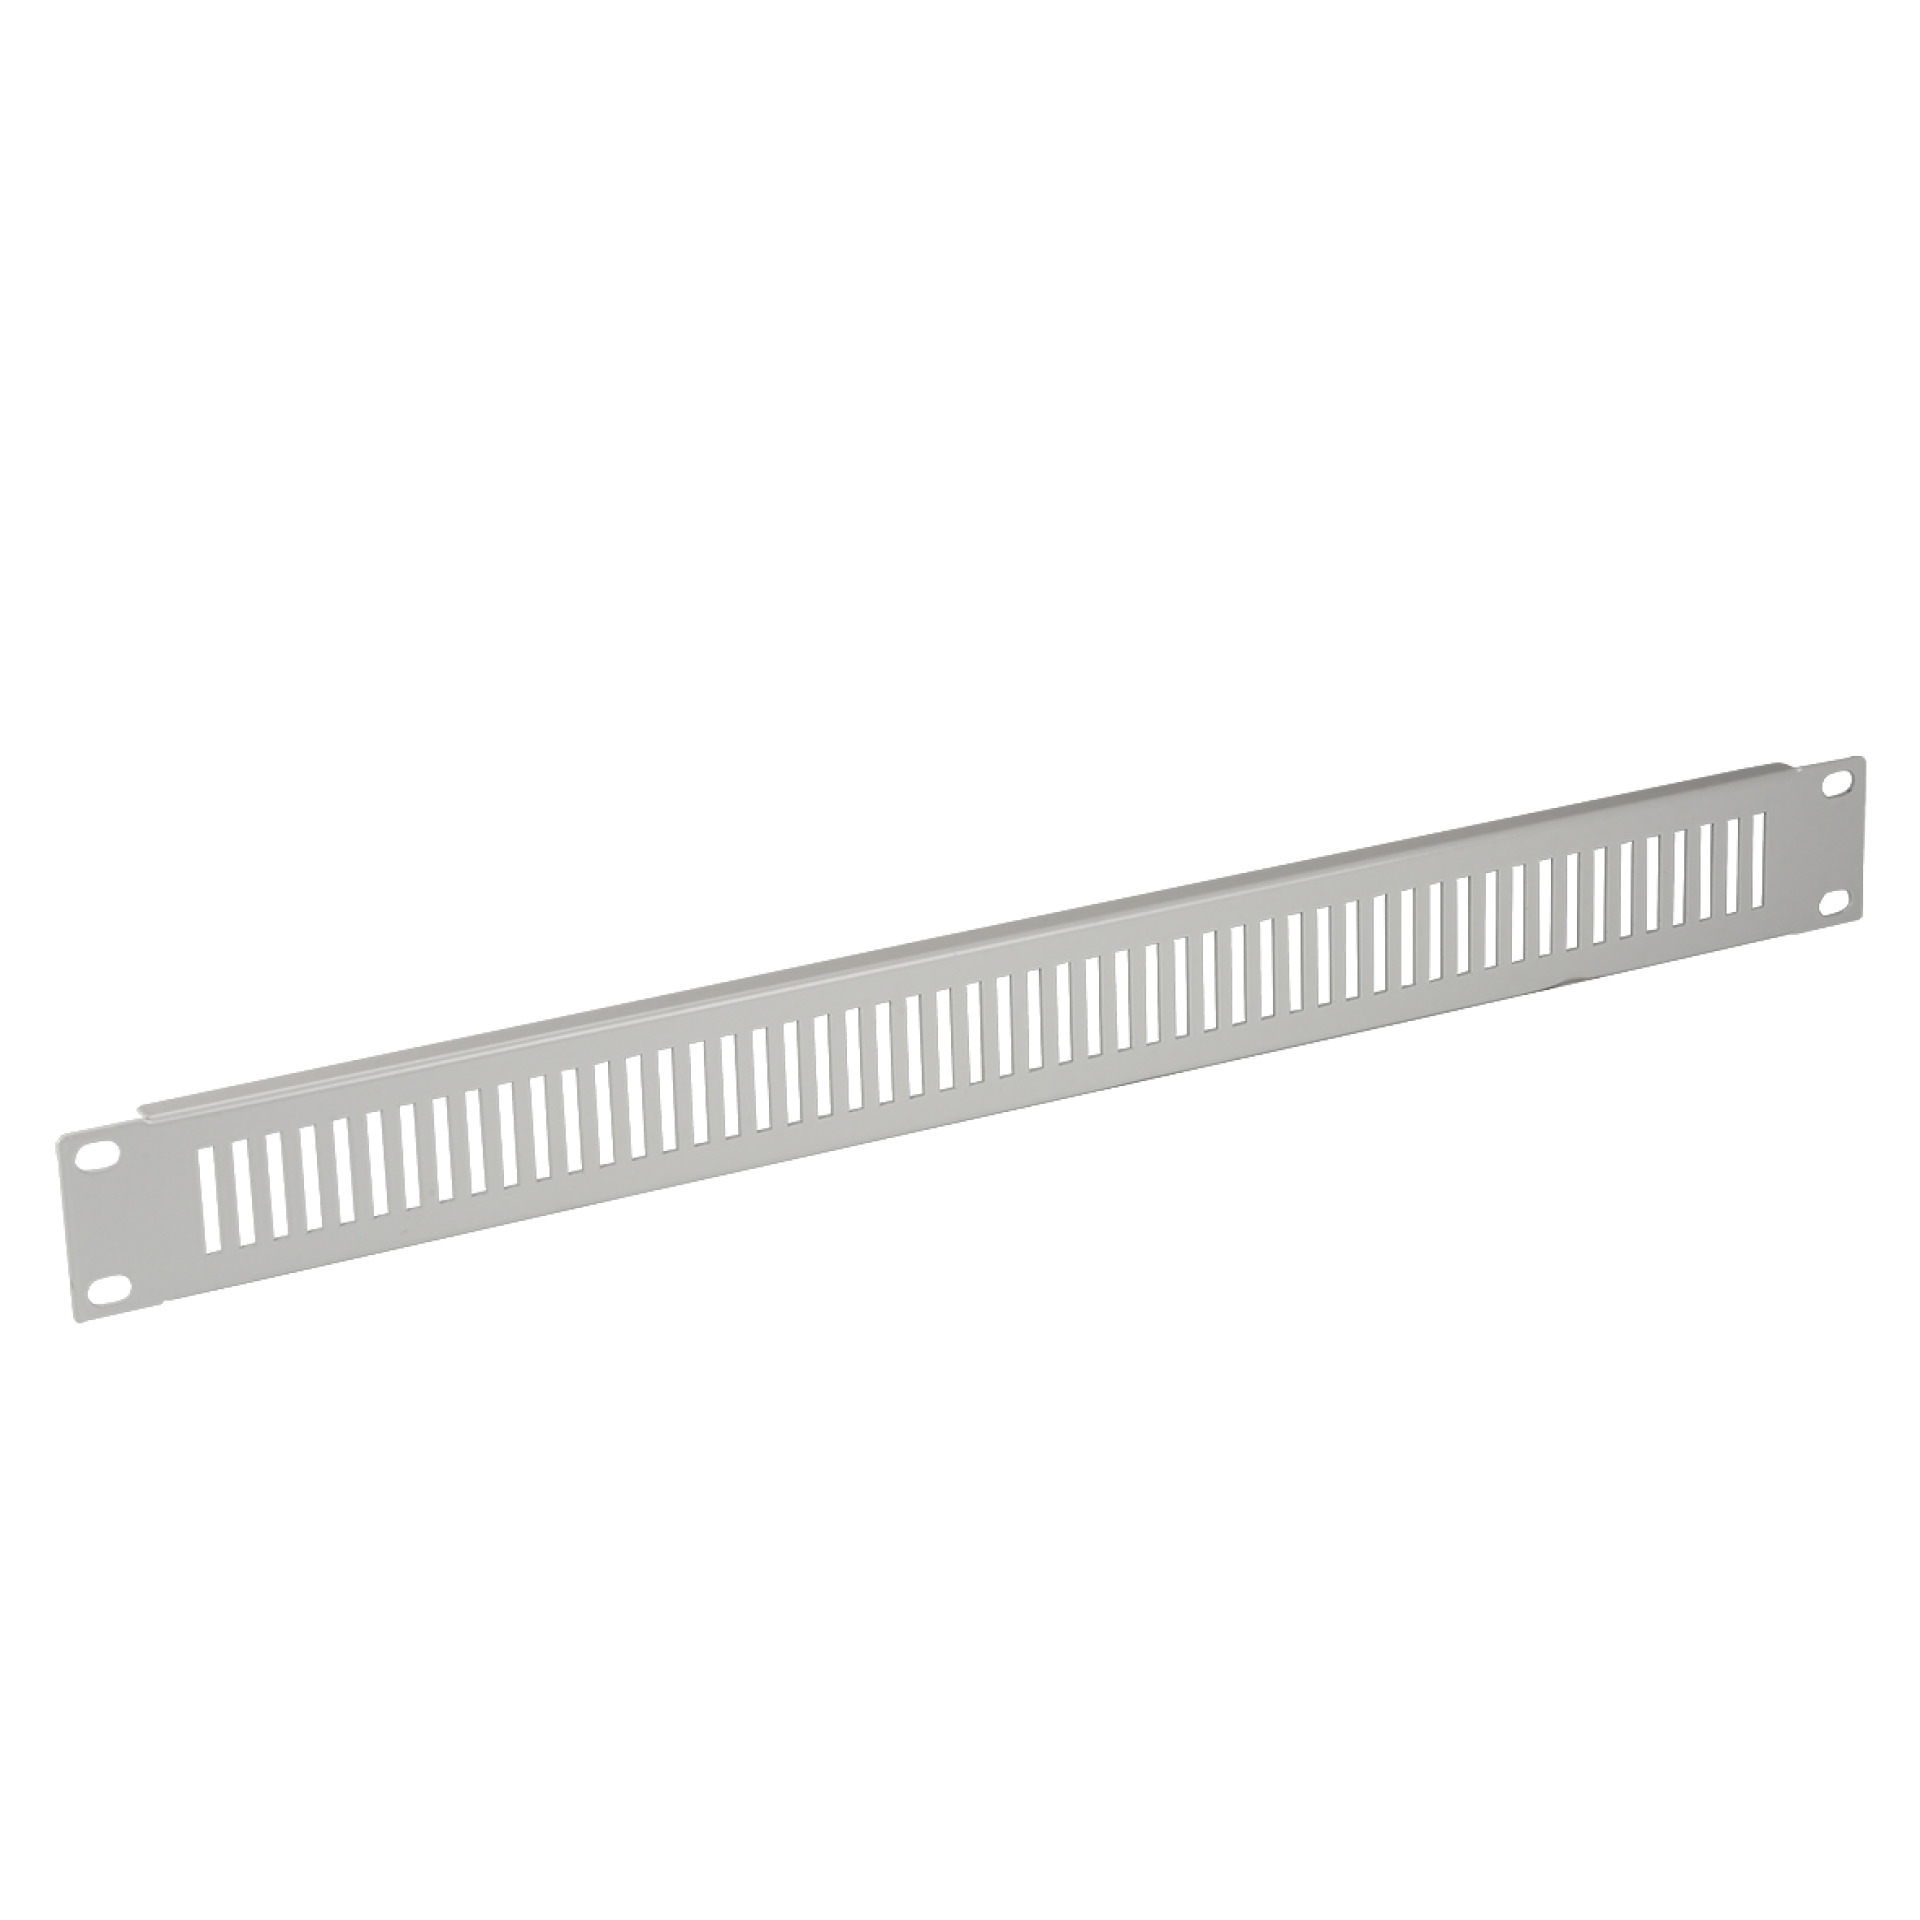 19" 2U Dummy Plate, Perforated, RAL9005